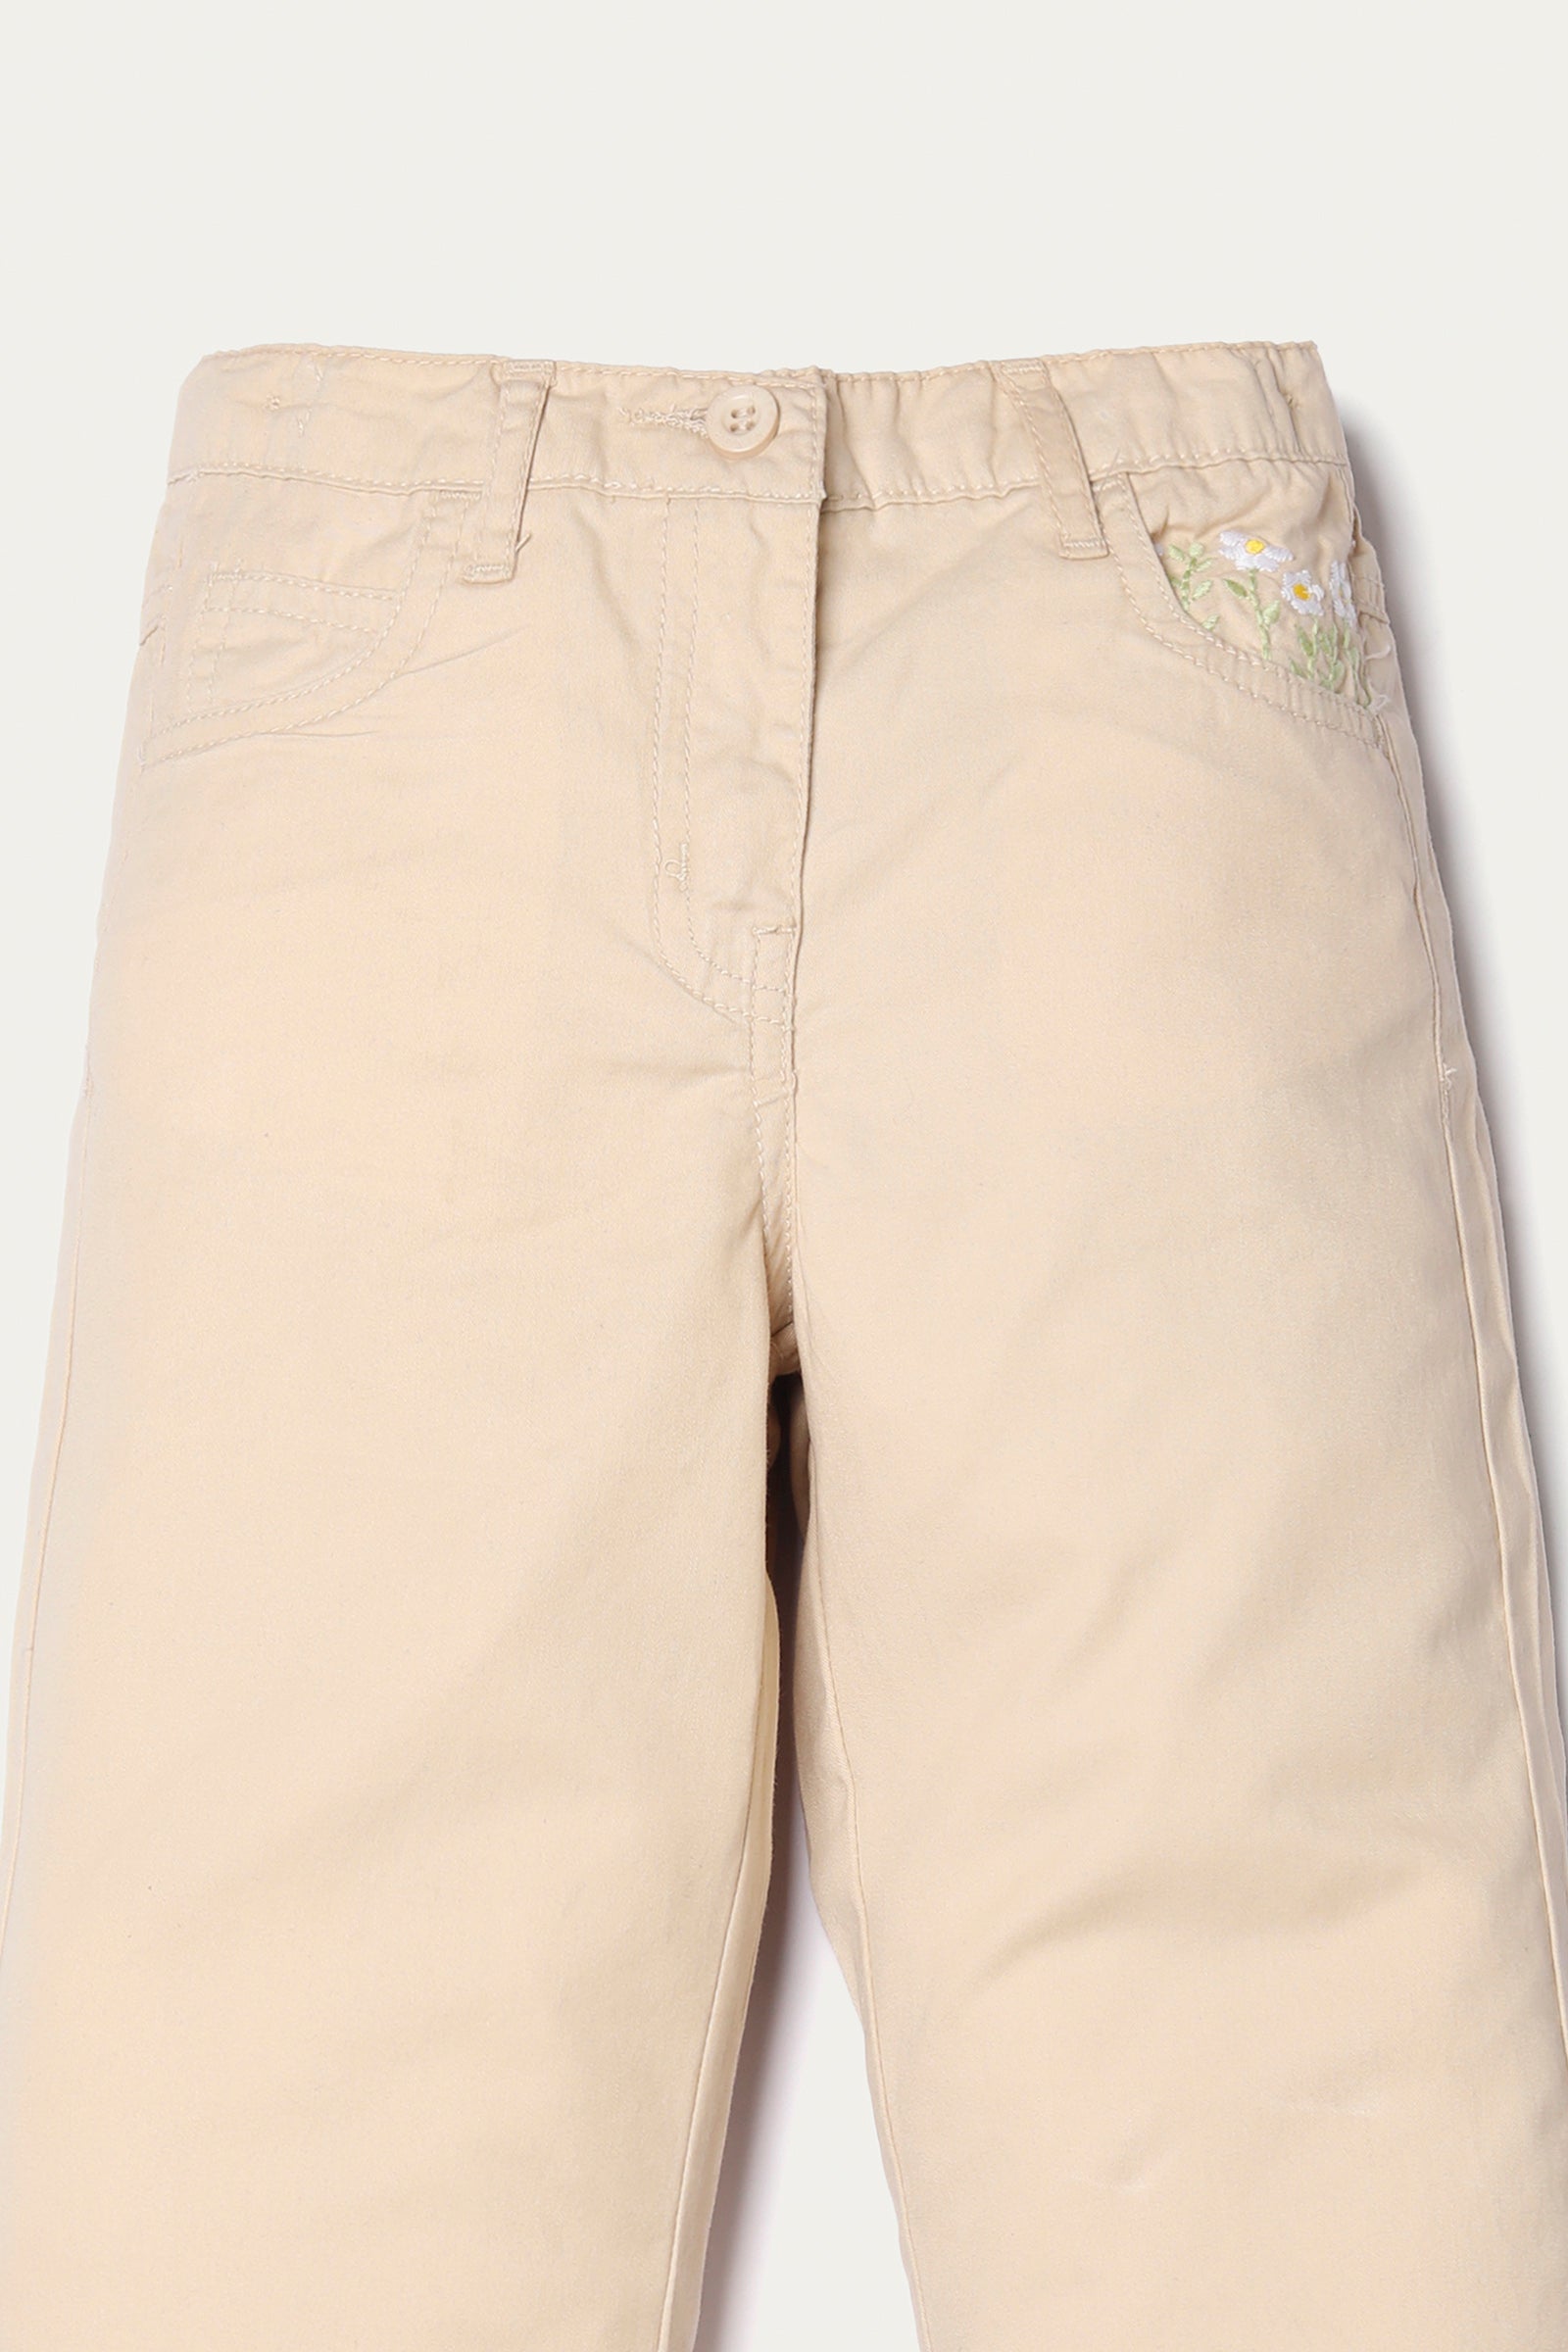 Embroidered Pants (GT-365)